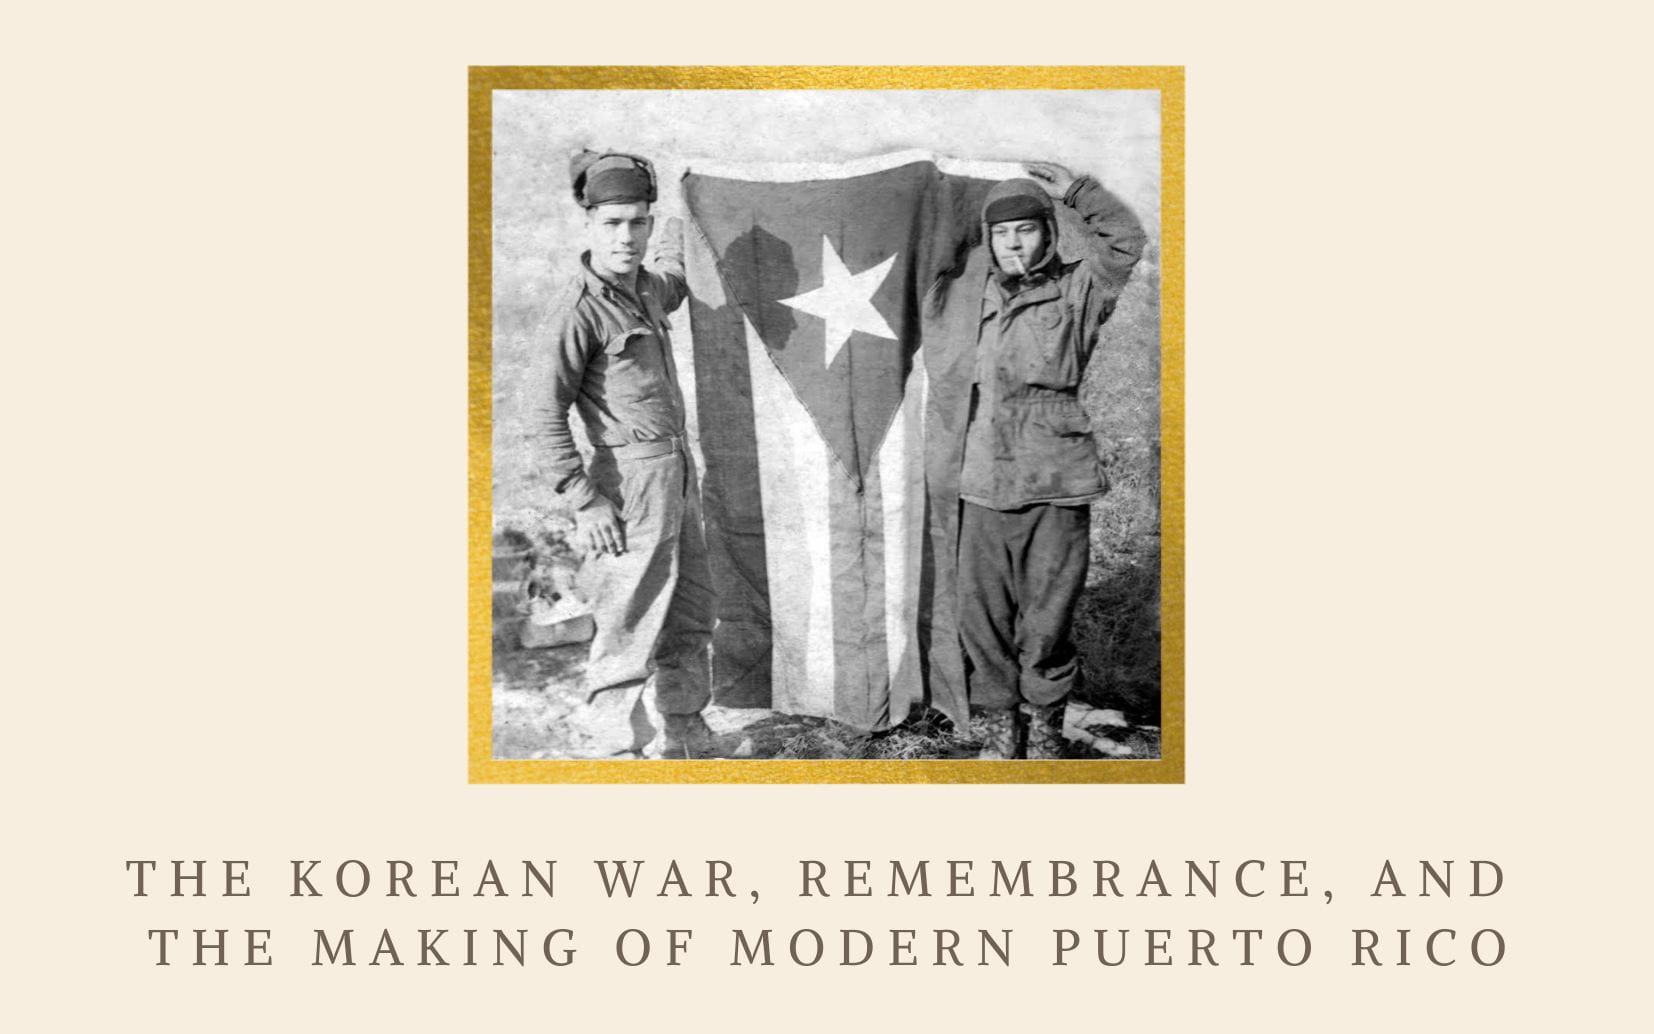 poster with black and white image of two men holding up the flag of puerto rico; text: The Korean War, Remembrance, and the Making of Modern Puerto Rico